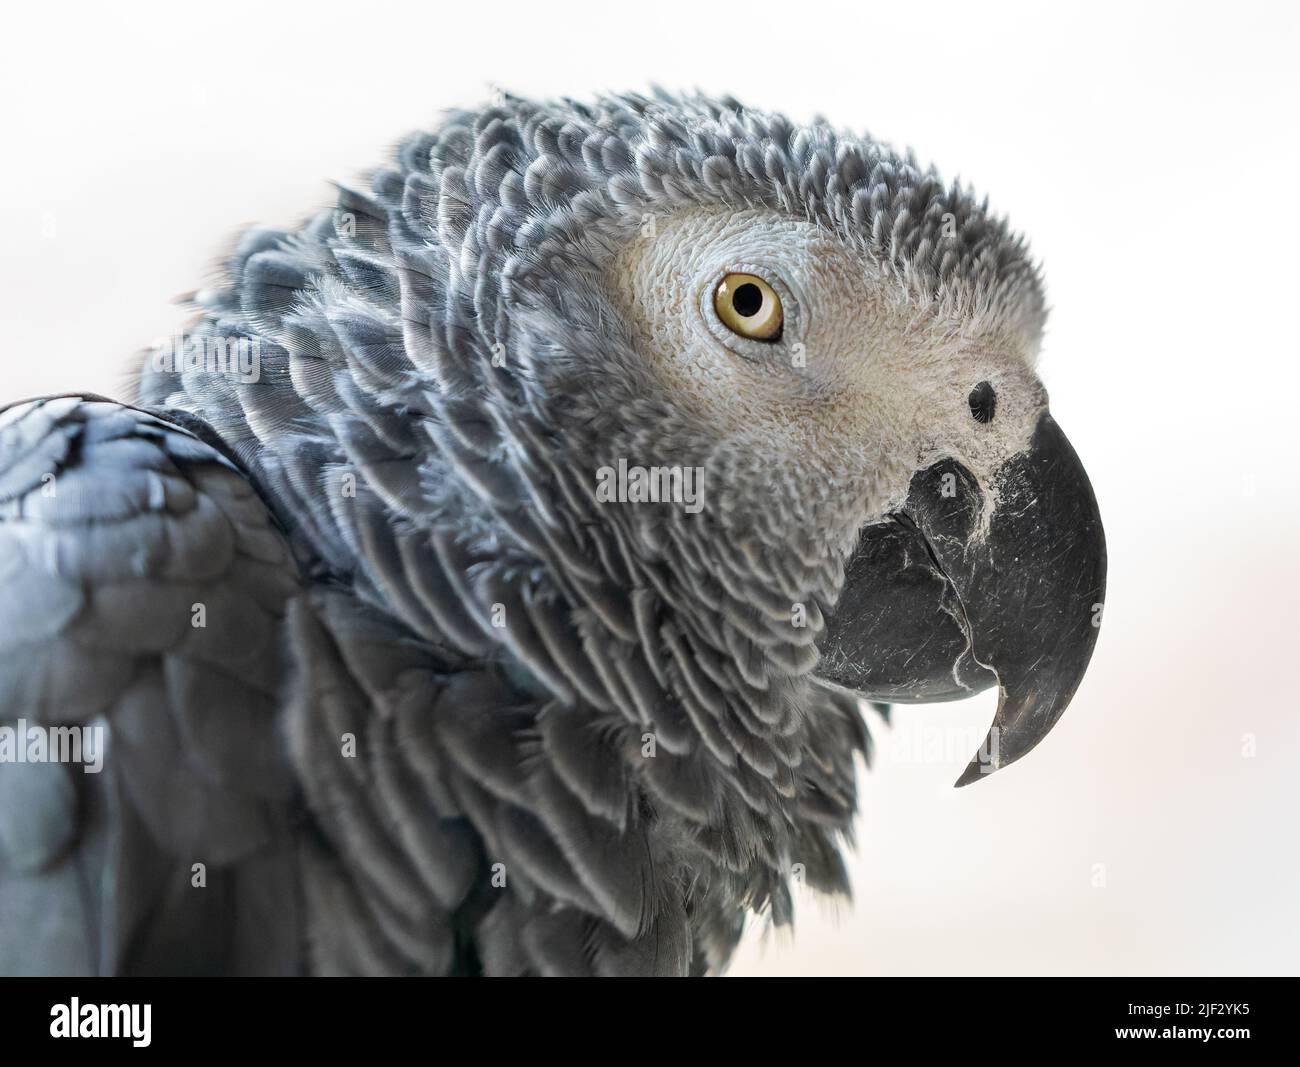 Close-up view of an African grey parrot (Psittacus erithacus) Stock Photo